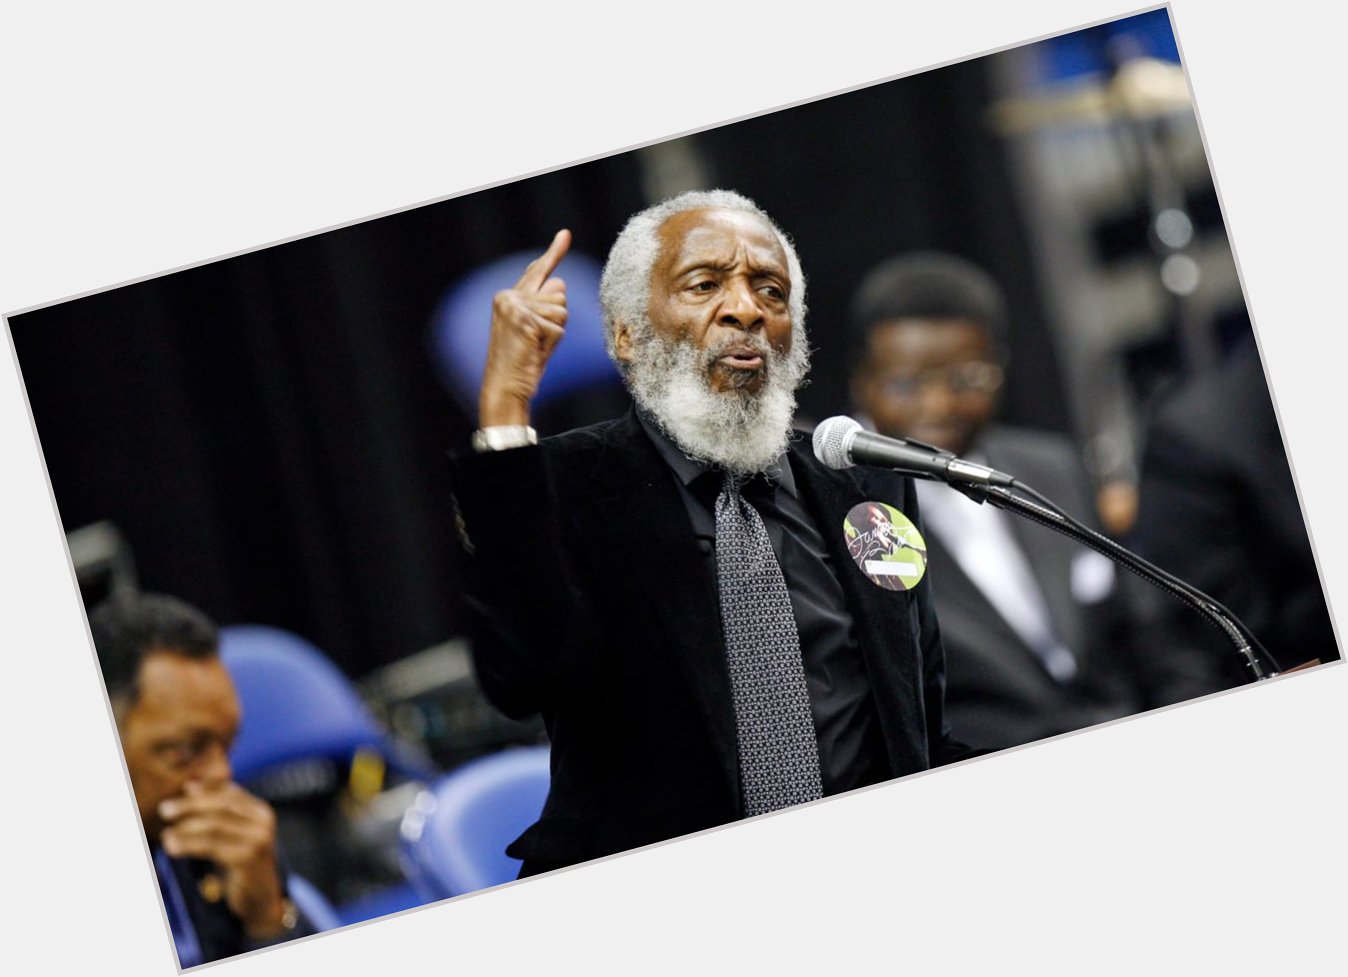 Happy Birthday to Dick Gregory who would have turned 85 today! 